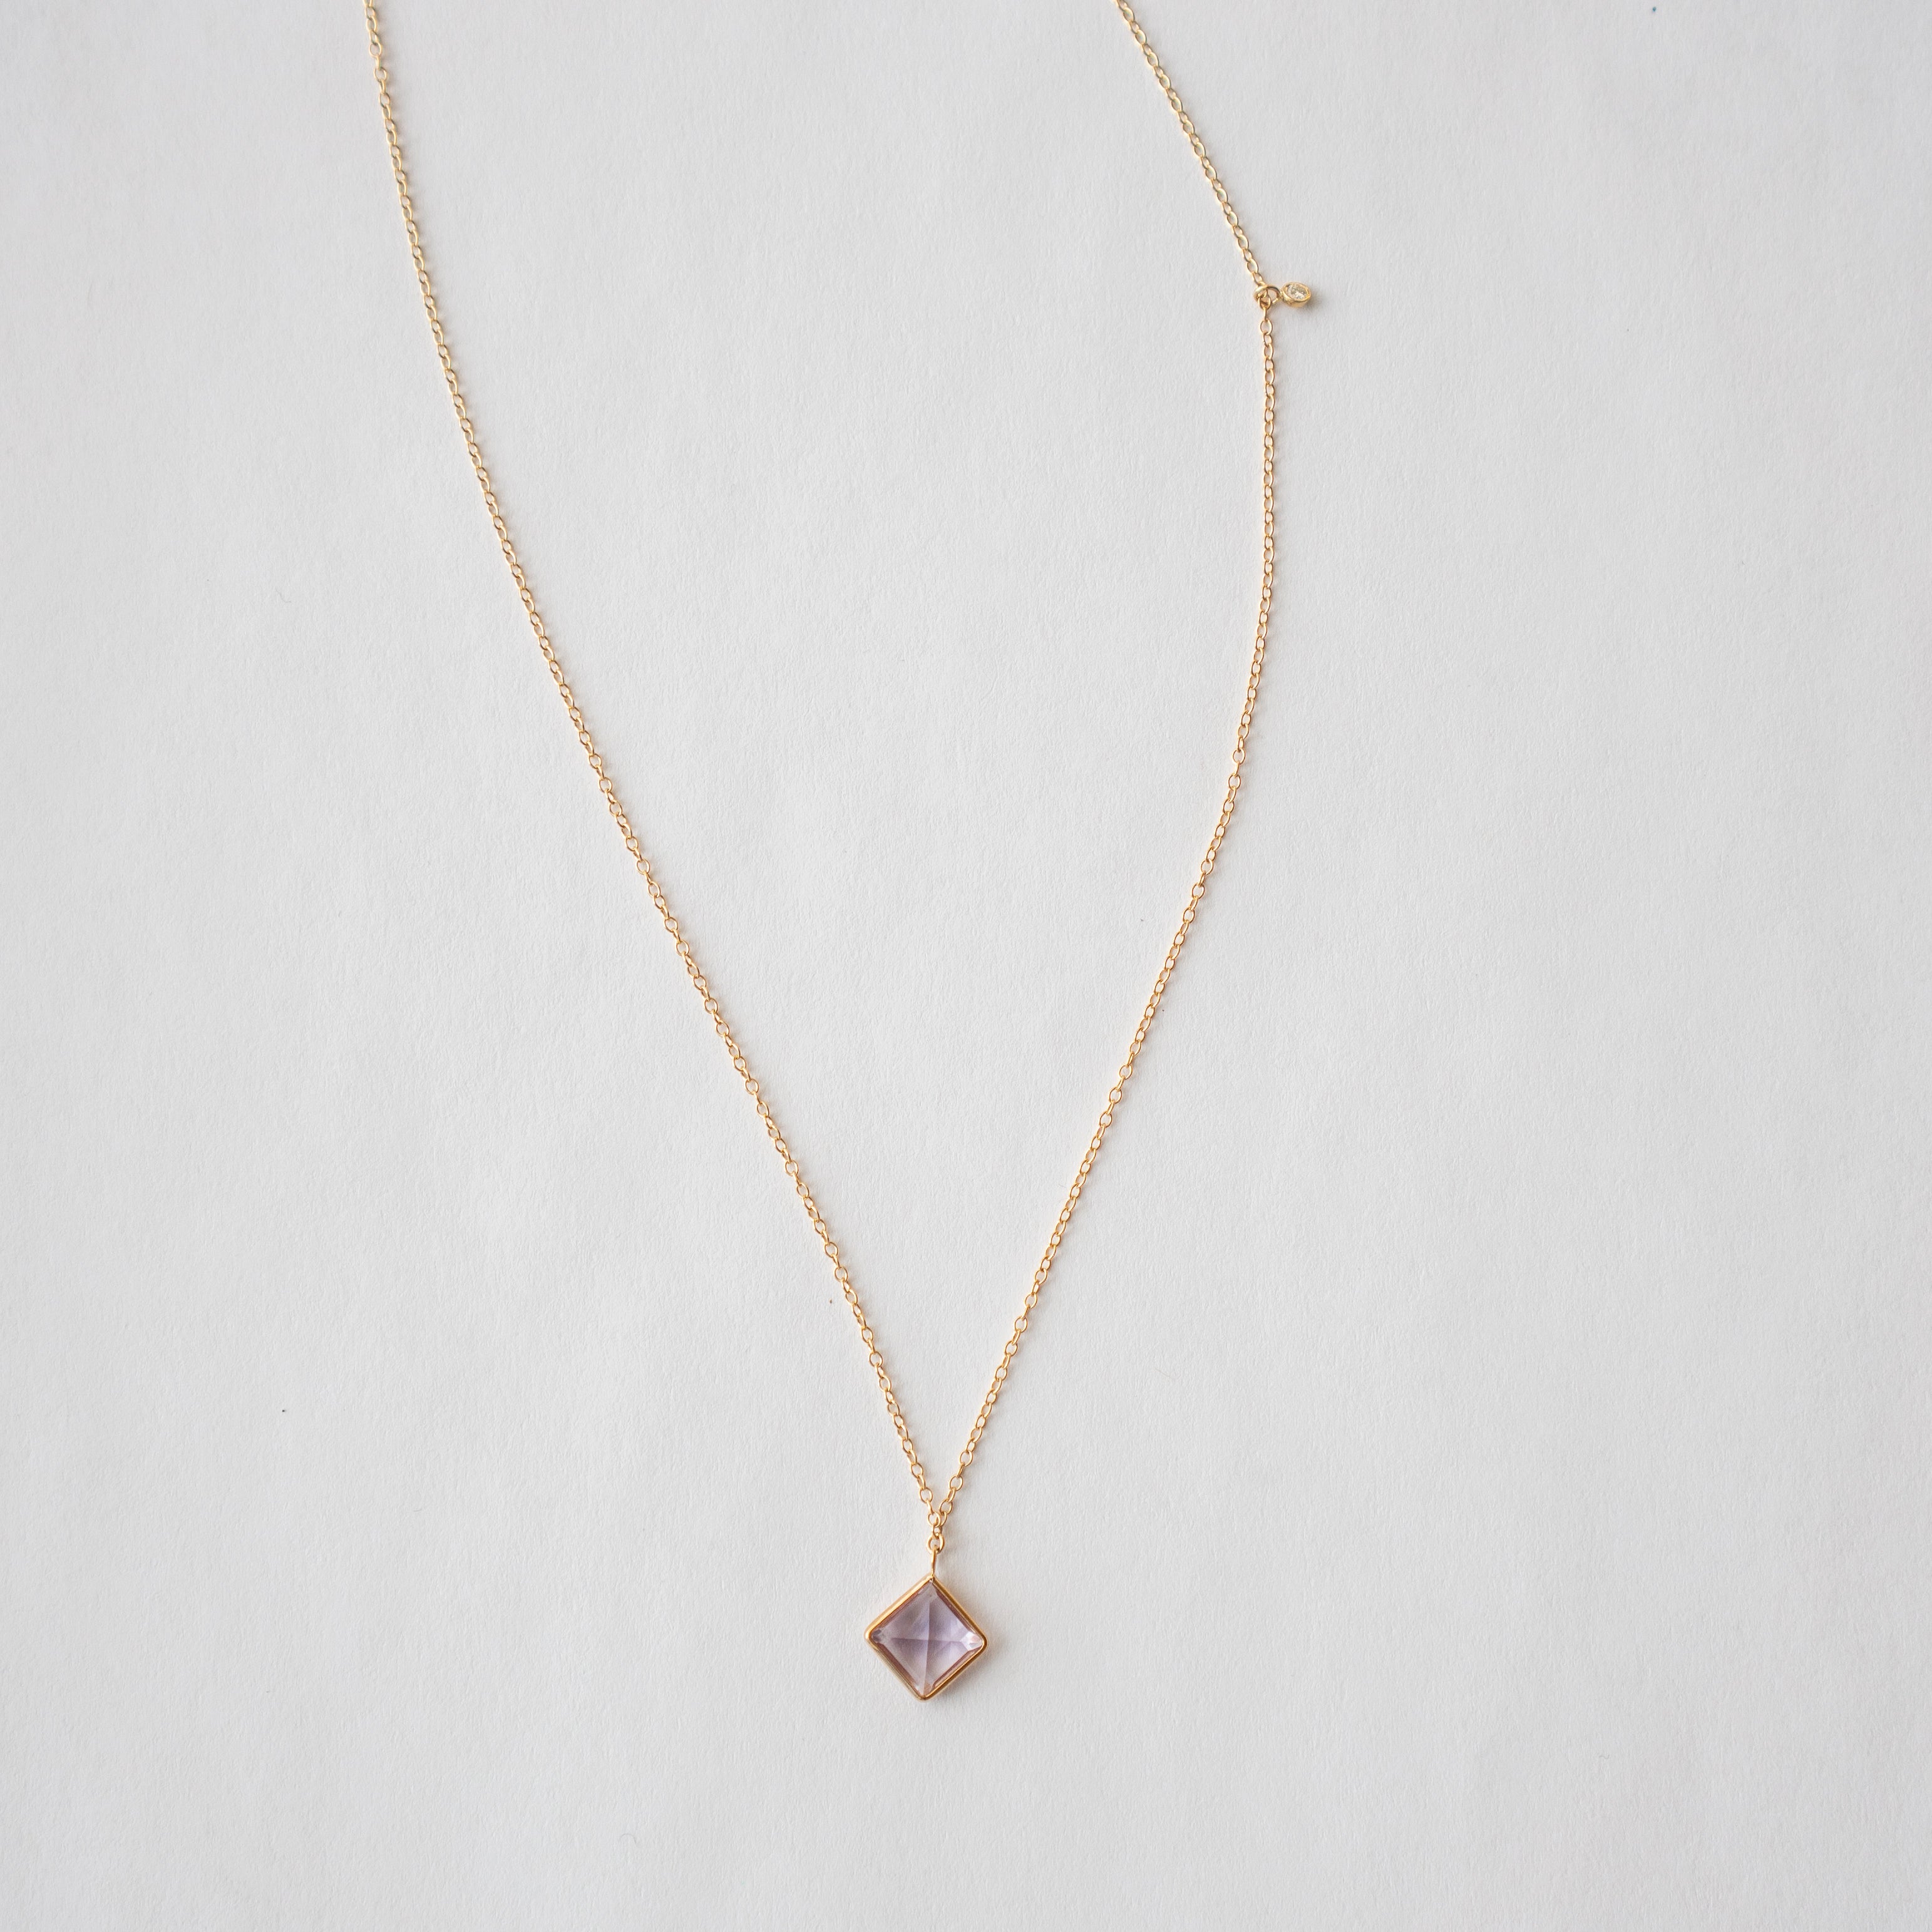 Beautiful Tisa Necklace with Square amethyst precious gemstone and brilliant cut natural white diamond set in 14 karat yellow gold by SHW Fine Jewelry made in NYC